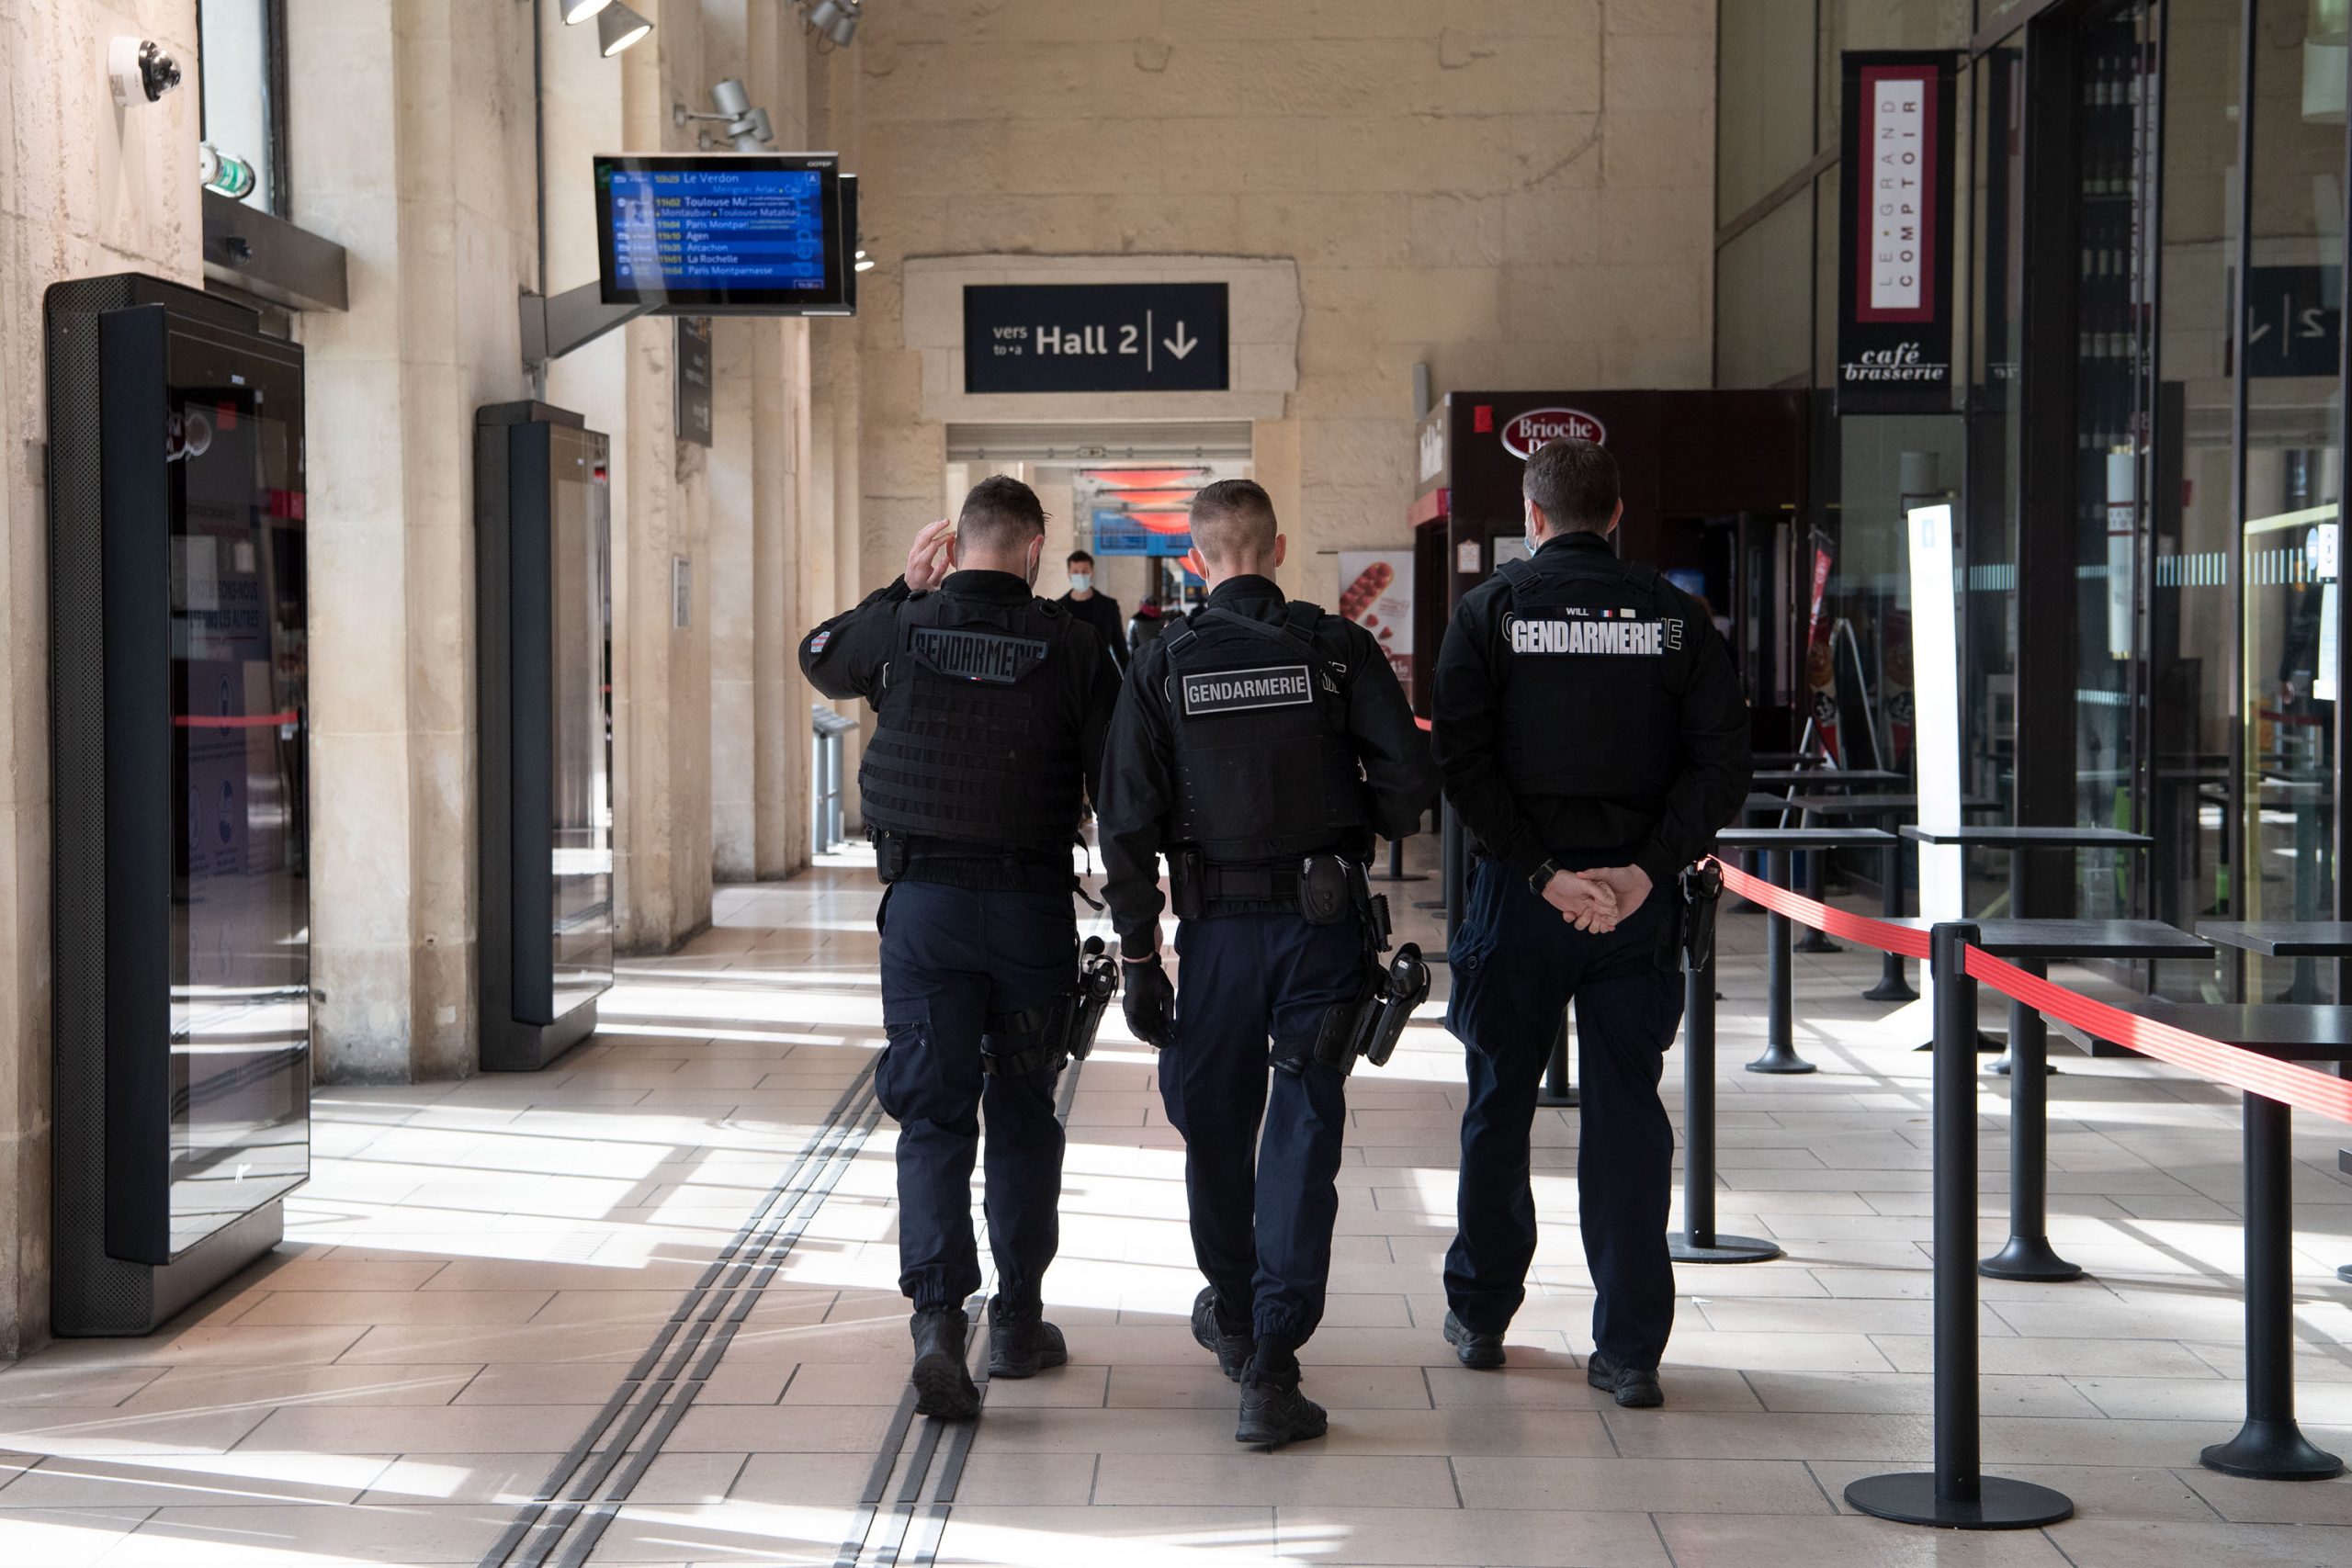 epa09101056 Policemen walk on the platform of Saint-Jean train station in Bordeaux, France, 27 March 2021. French Prime Minister Castex on March 18 announced additional lockdown restrictions in 16 regions of France as the country enters a third wave of the COVID-19 pandemic. With the new measures, more than 90,000 police and gendarmes mobilized for intensified controls in stations, airports and tolls while the health situation is critical with the third wave of coronavirus pandemic and the predominance of the British variant of the virus.  EPA/CAROLINE BLUMBERG